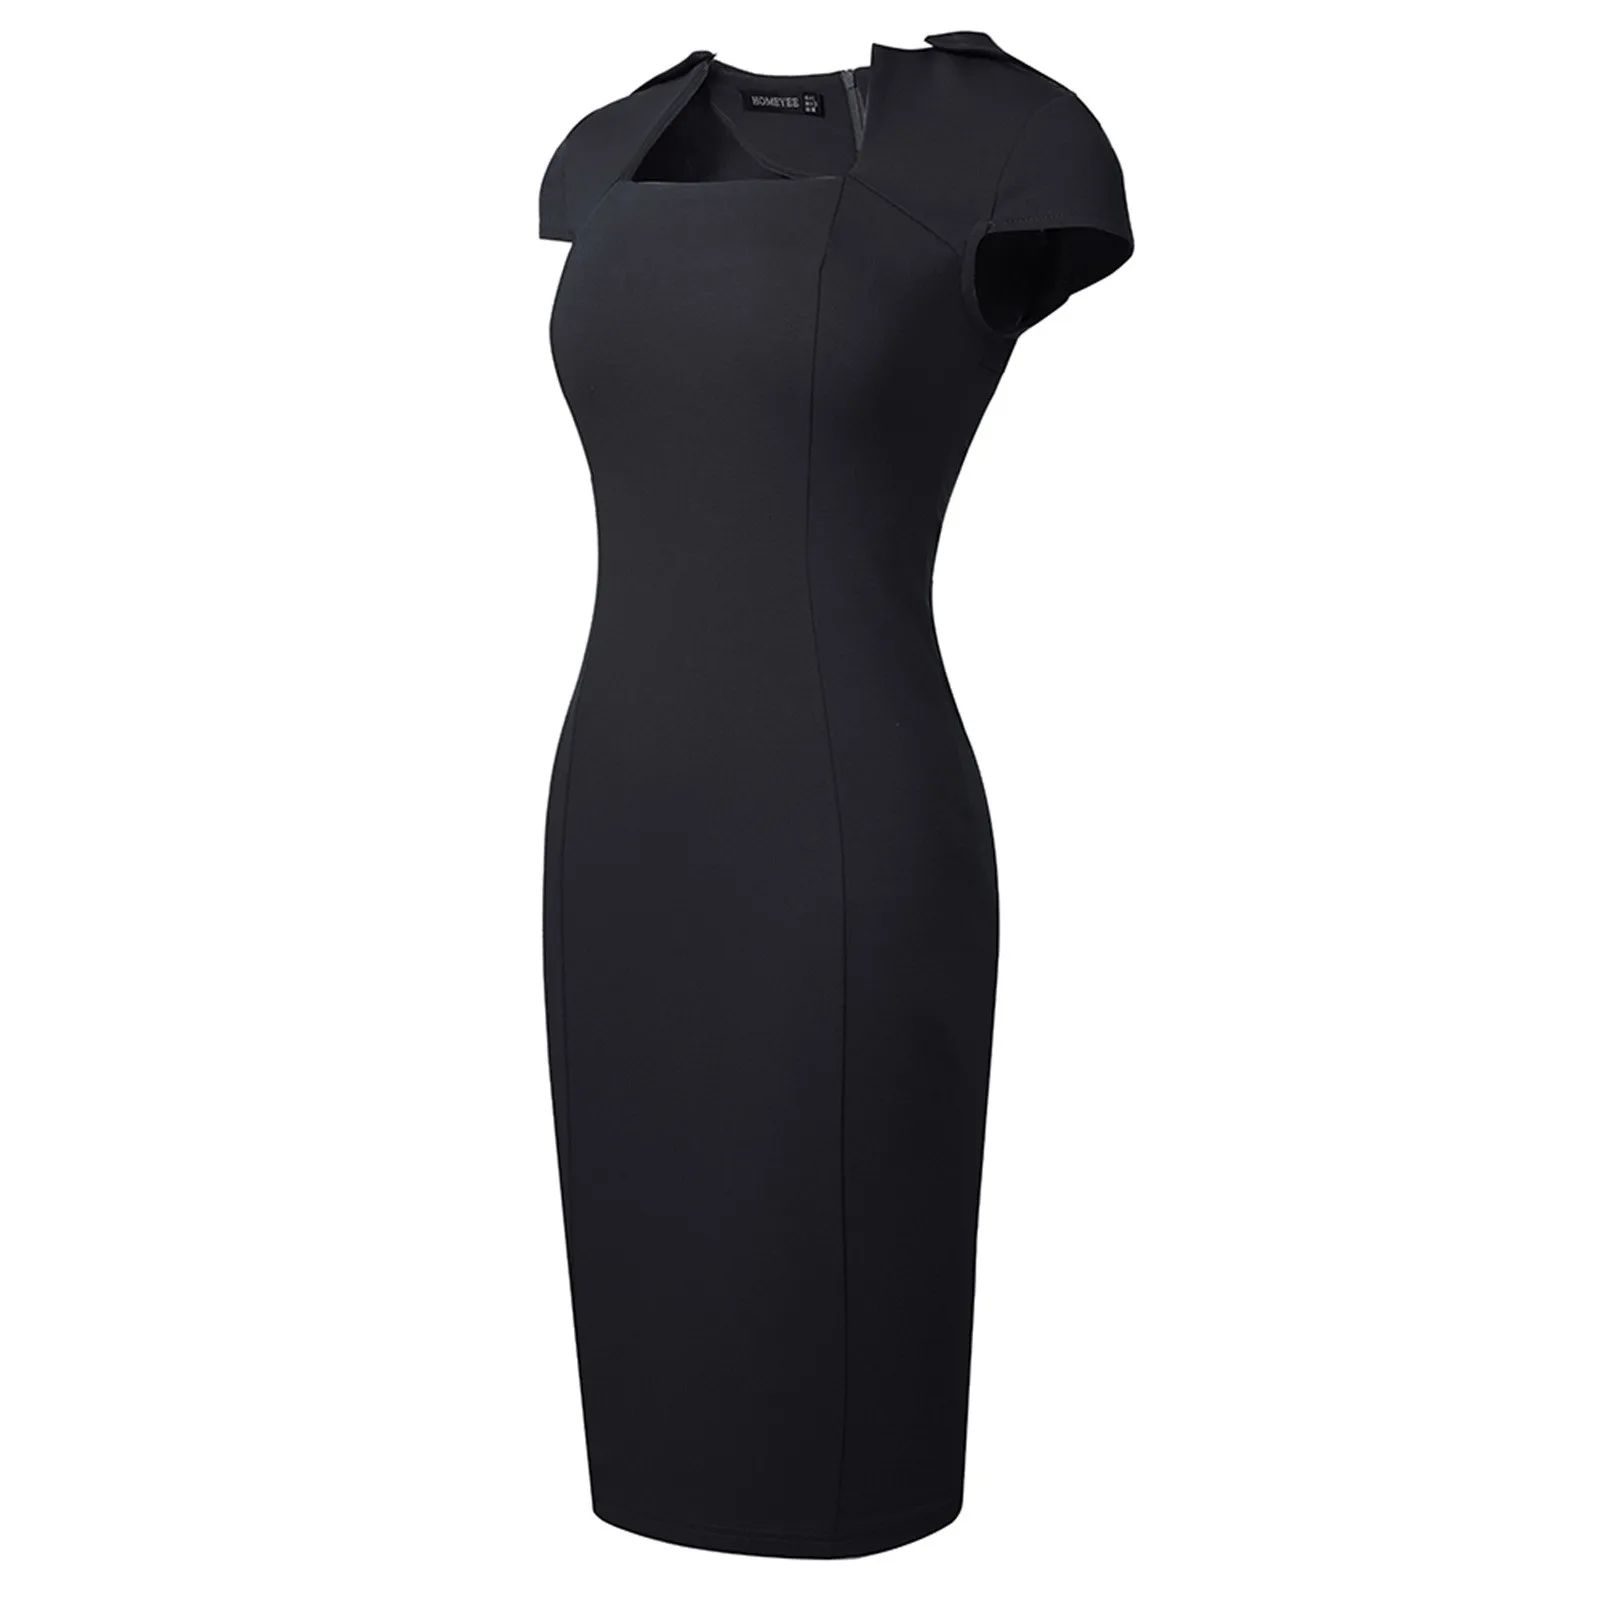 Women-Elegant-Solid-Color-Cap-Sleeve-Square-Collar-Lady-Bodycon-Office-Pencil-Dress-Summer-Formal-Business.jpg